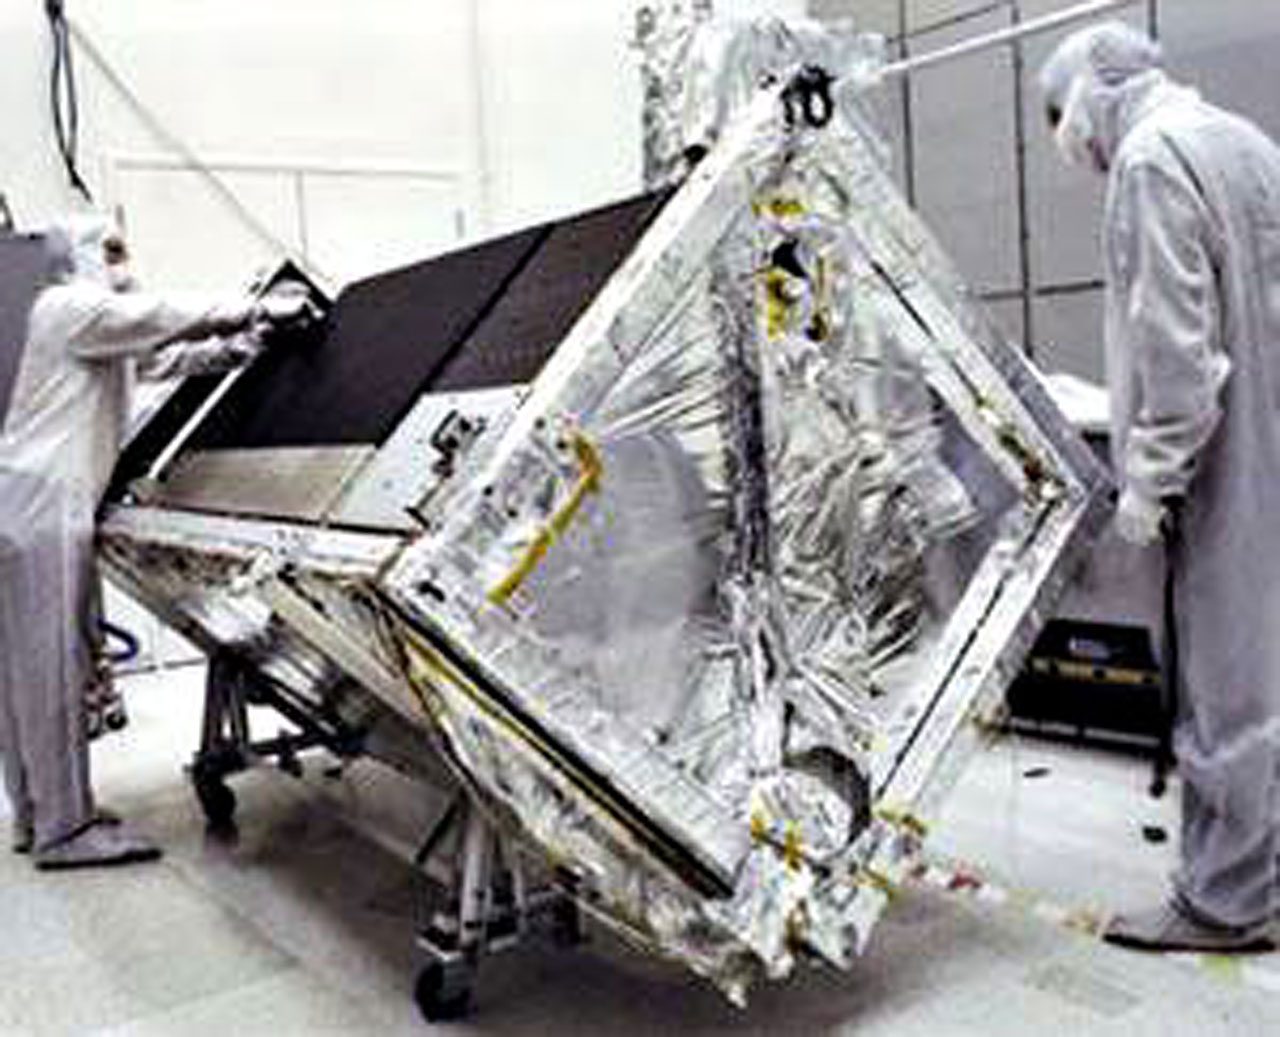 GHRS being prepared for launch at Ball Aerospace & Technologies Corp.